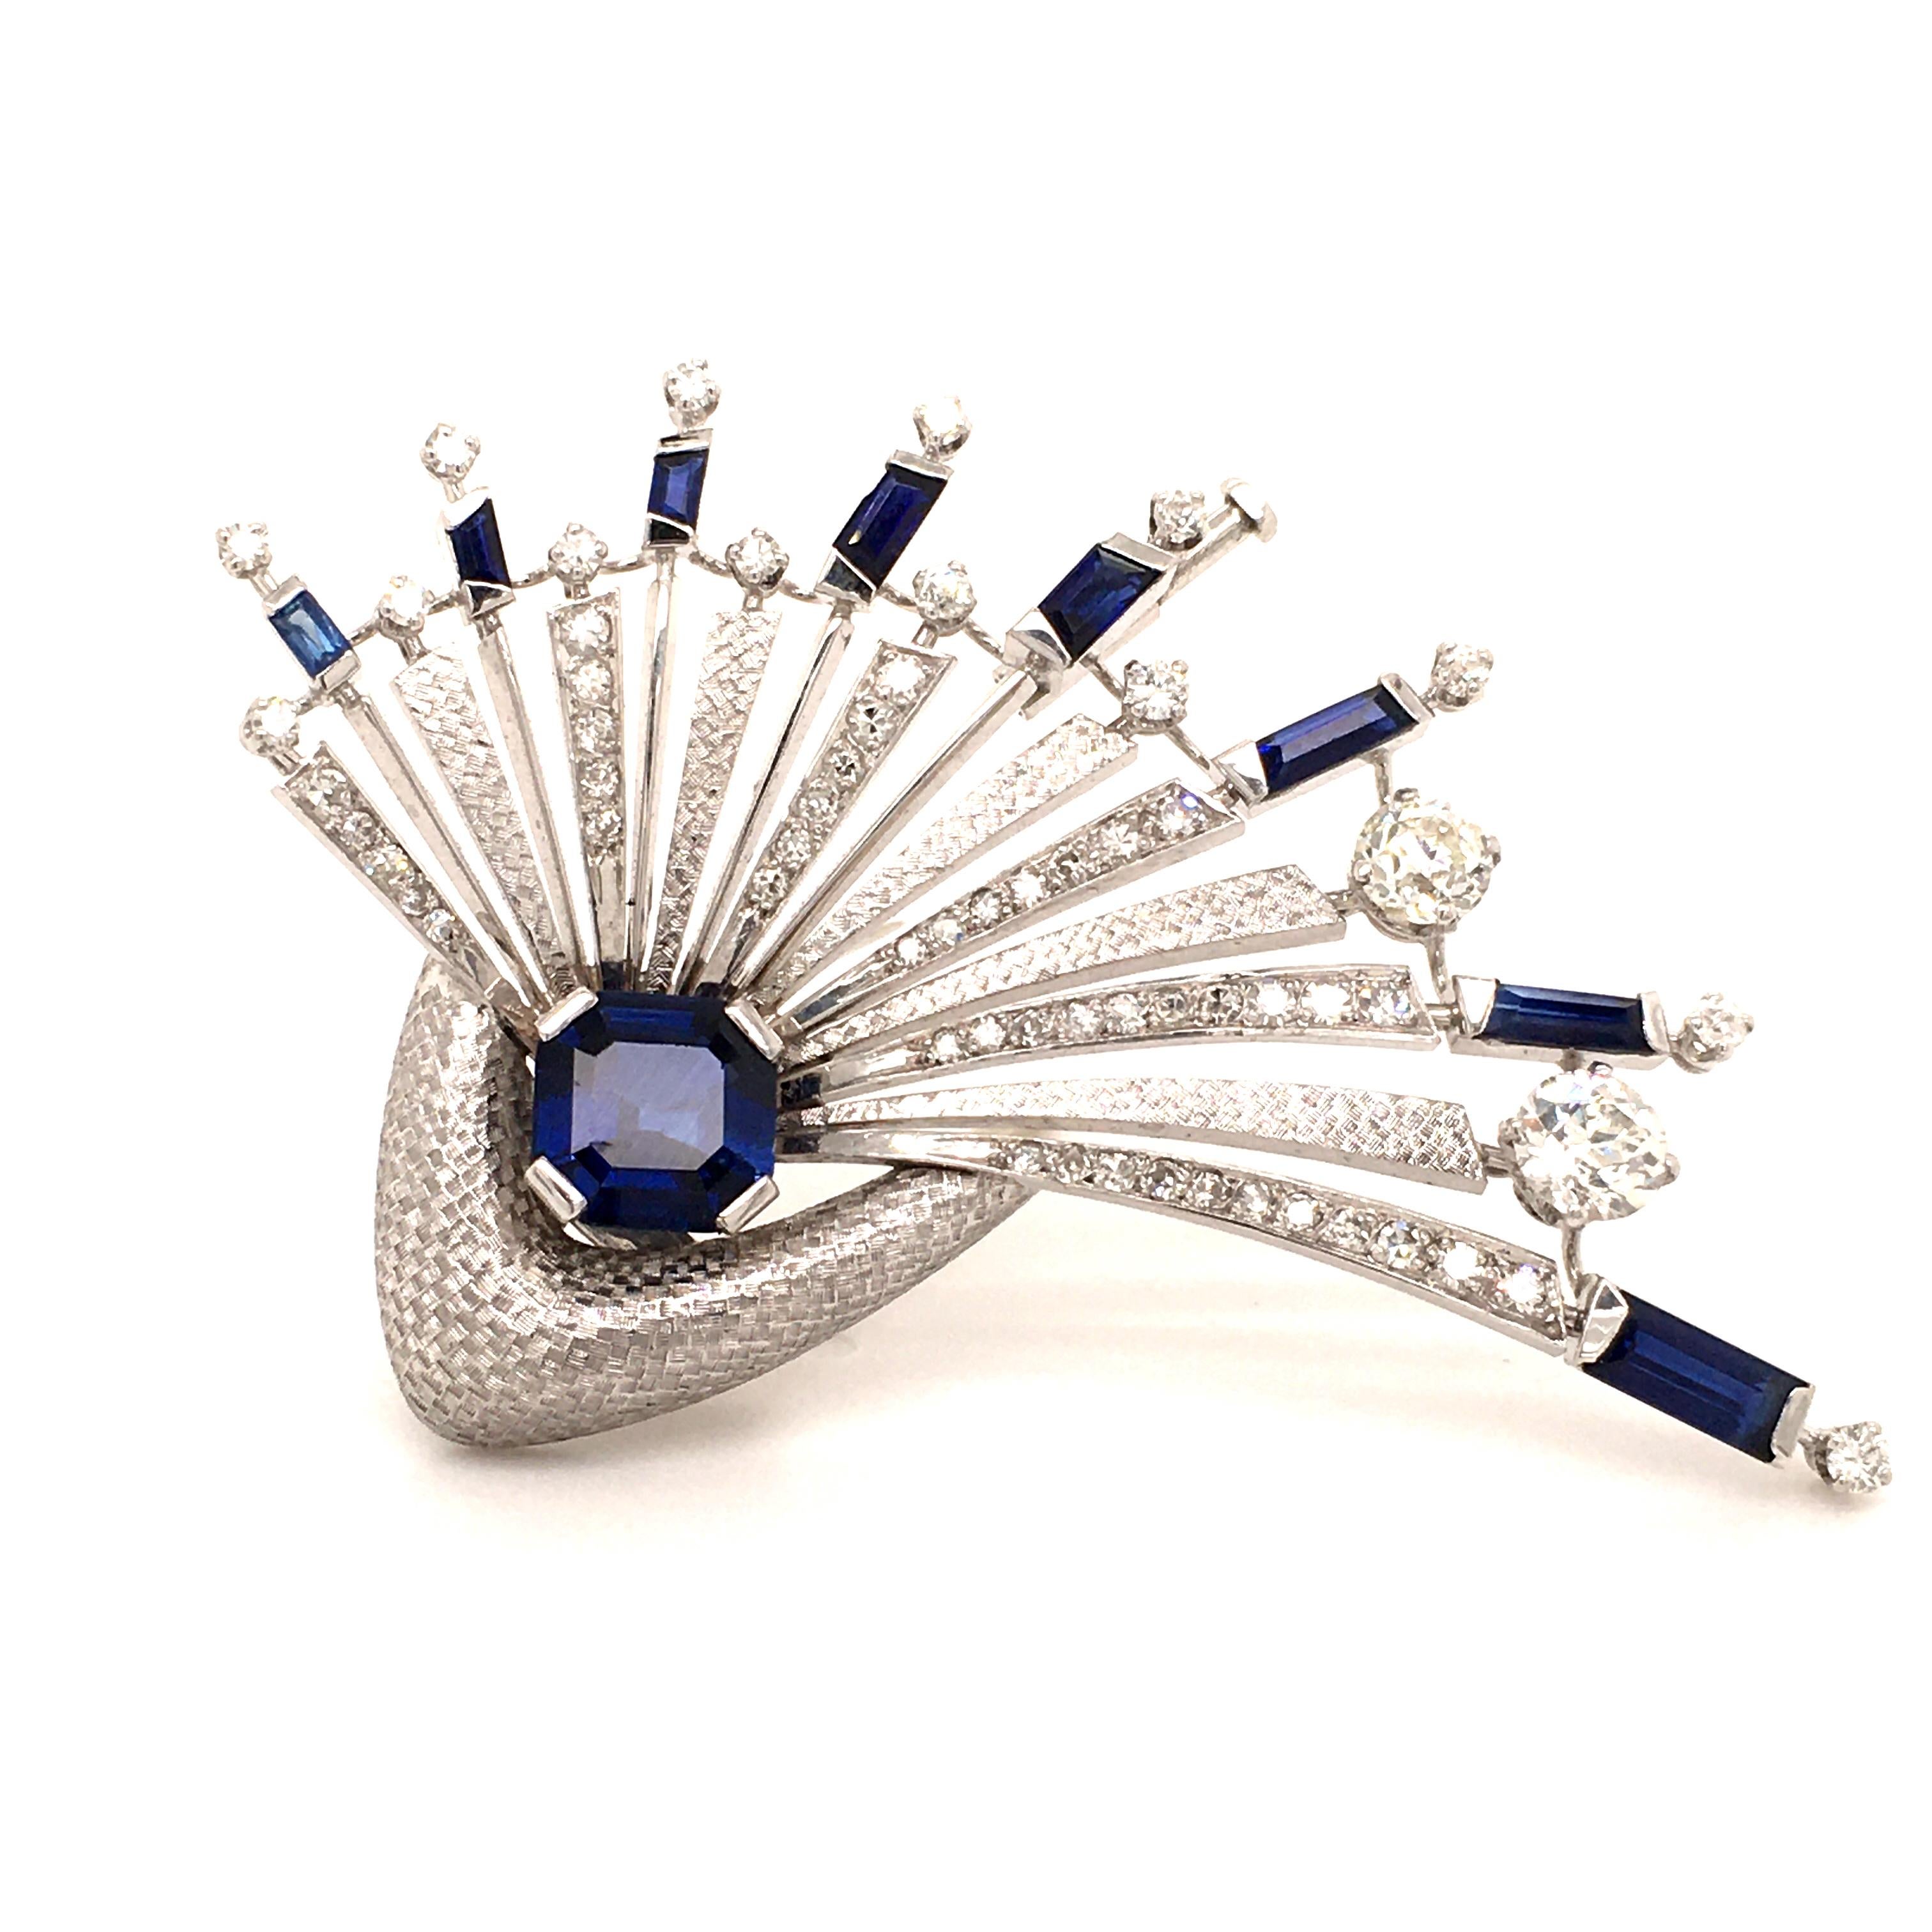 This fabulous Gubelin brooch in 18 karat white gold features an intensely colored octagonal cut sapphire of 2.00 carats. The shape of the brooch reminds of an elegantly spread out bird wing. Set with 8 tapered baguette cut sapphires of 1.10 carats